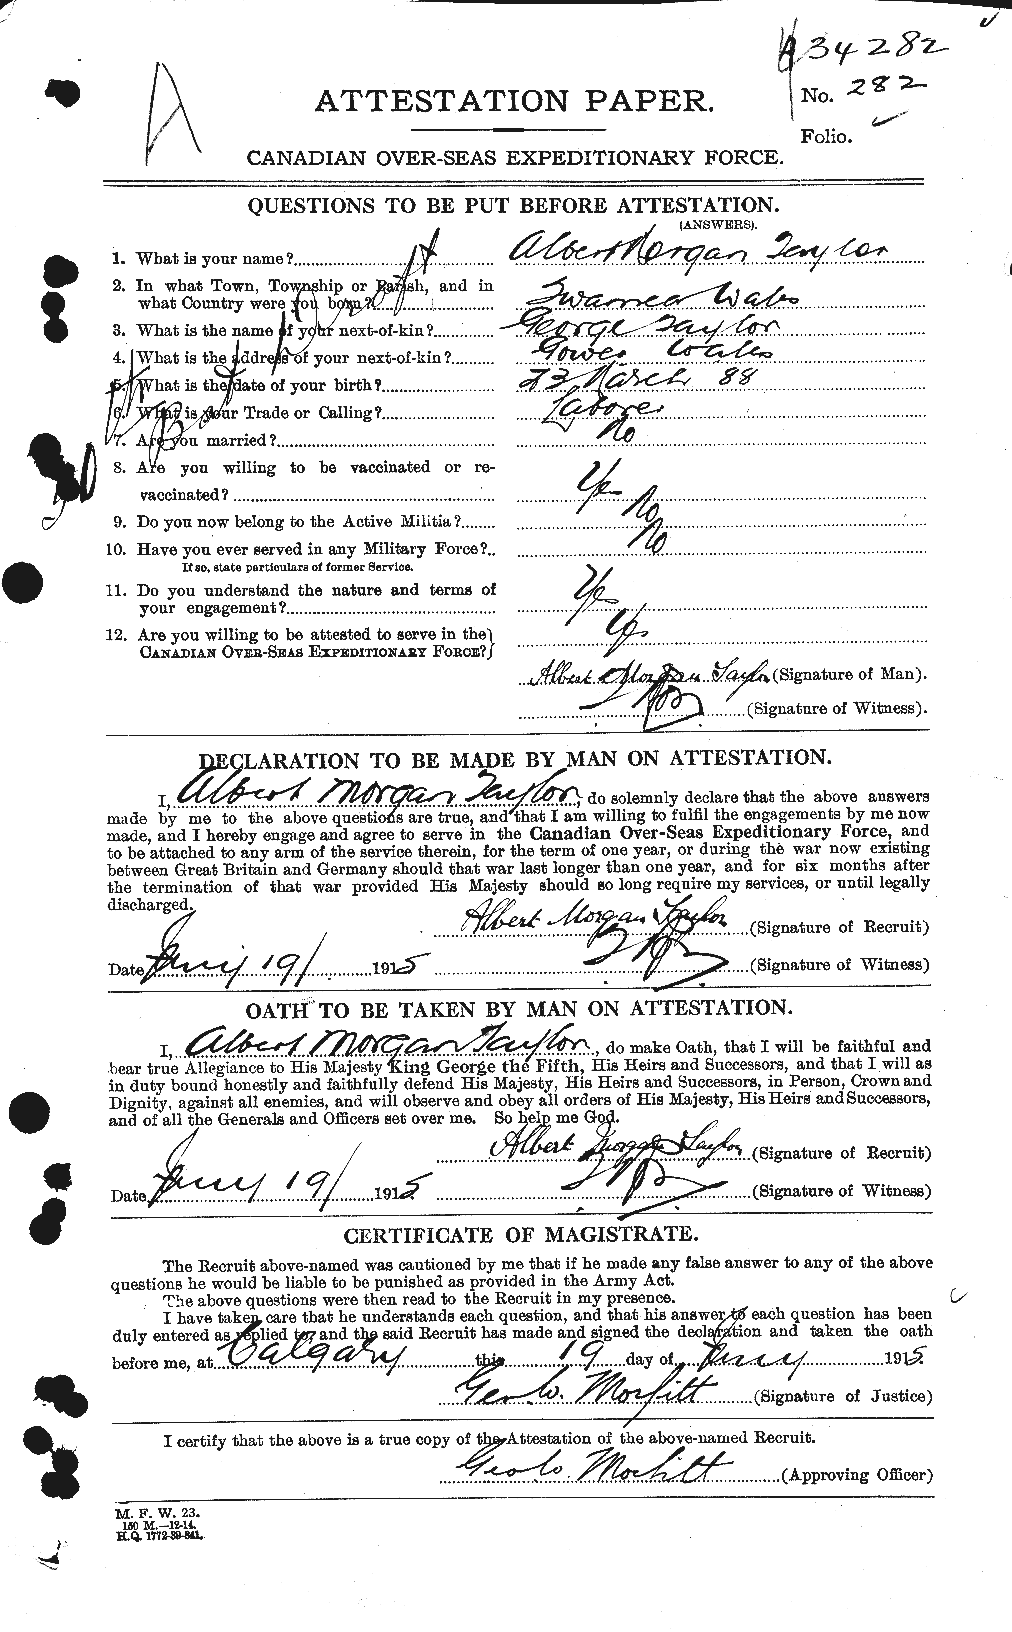 Personnel Records of the First World War - CEF 626123a